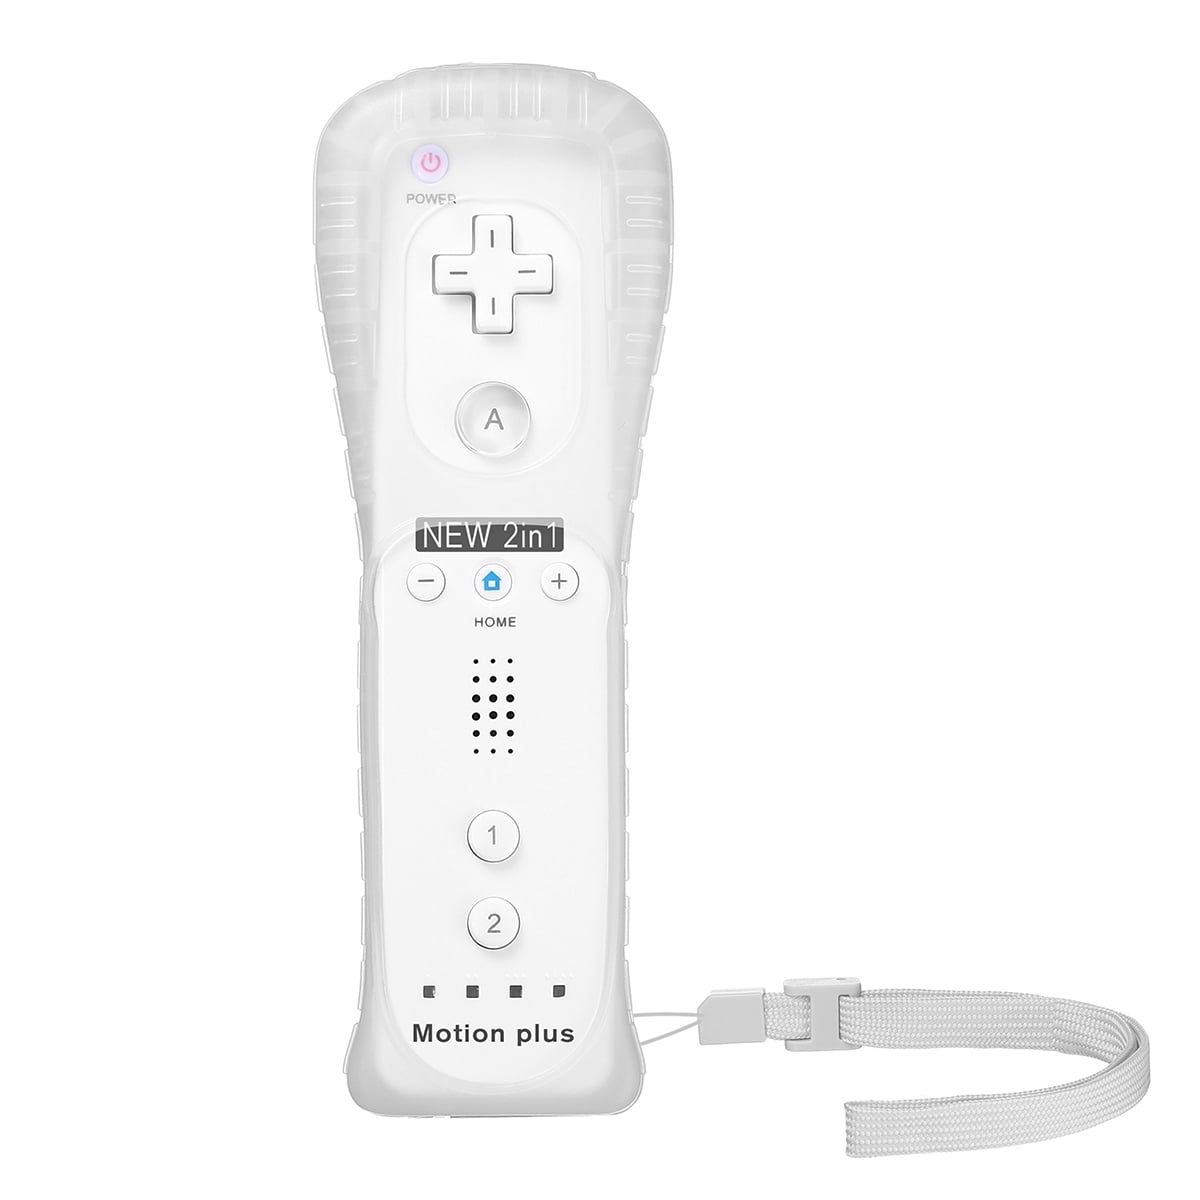 Motion Plus Remote Controller for Nintendo Wii / Wii U Console Video Games  with Case 